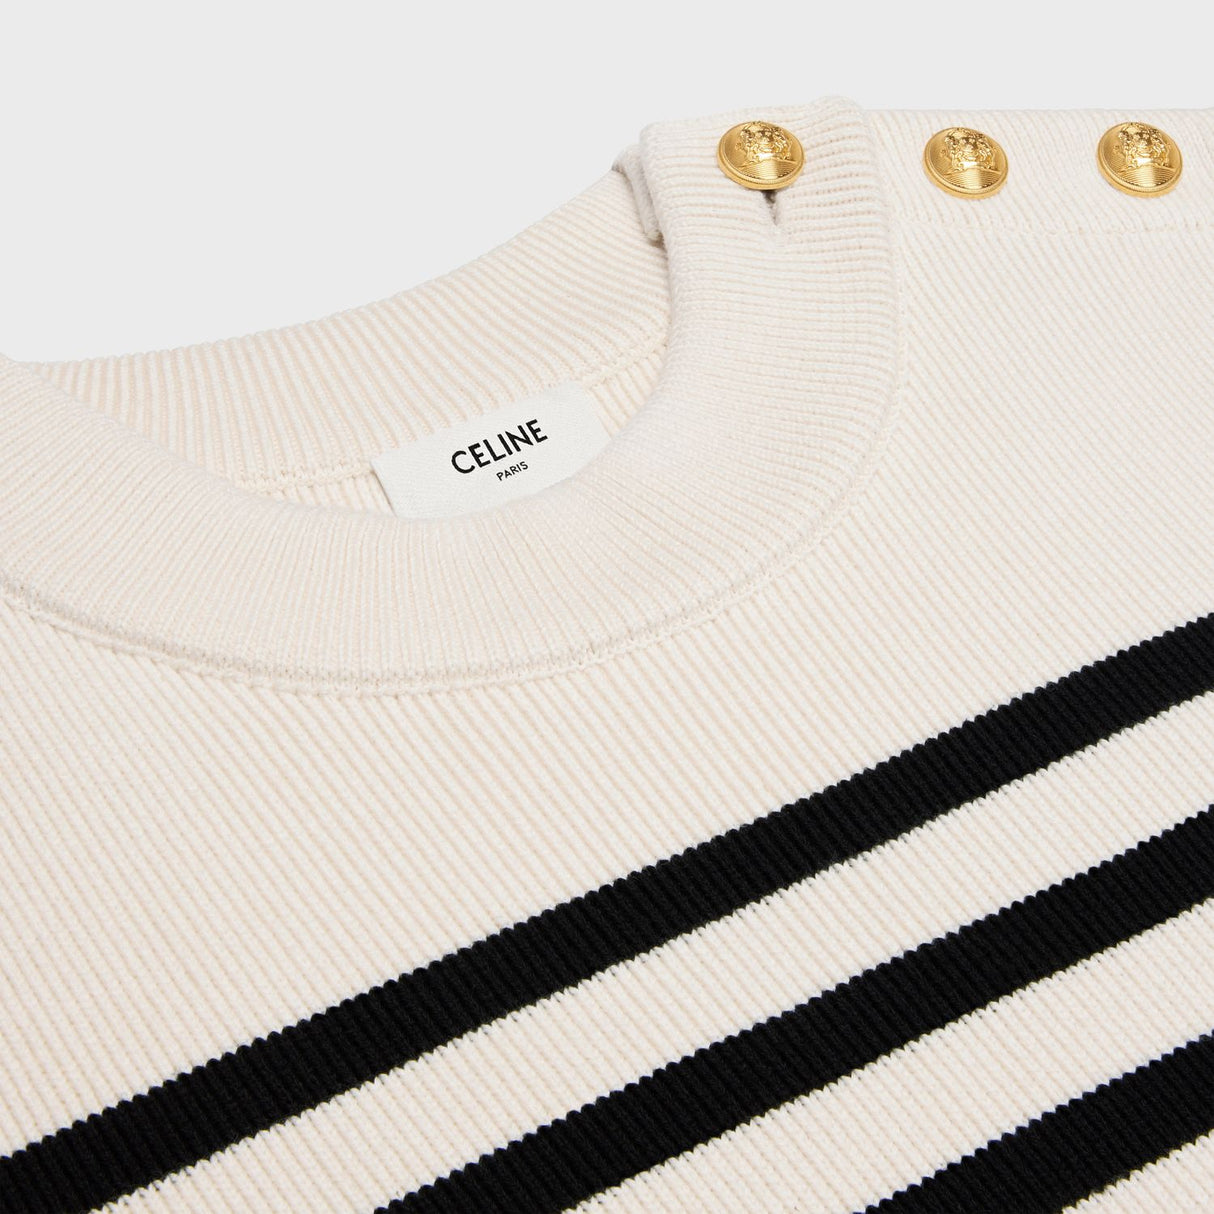 CELINE Ivory and black striped long-sleeved sweater with gold-tone buttons